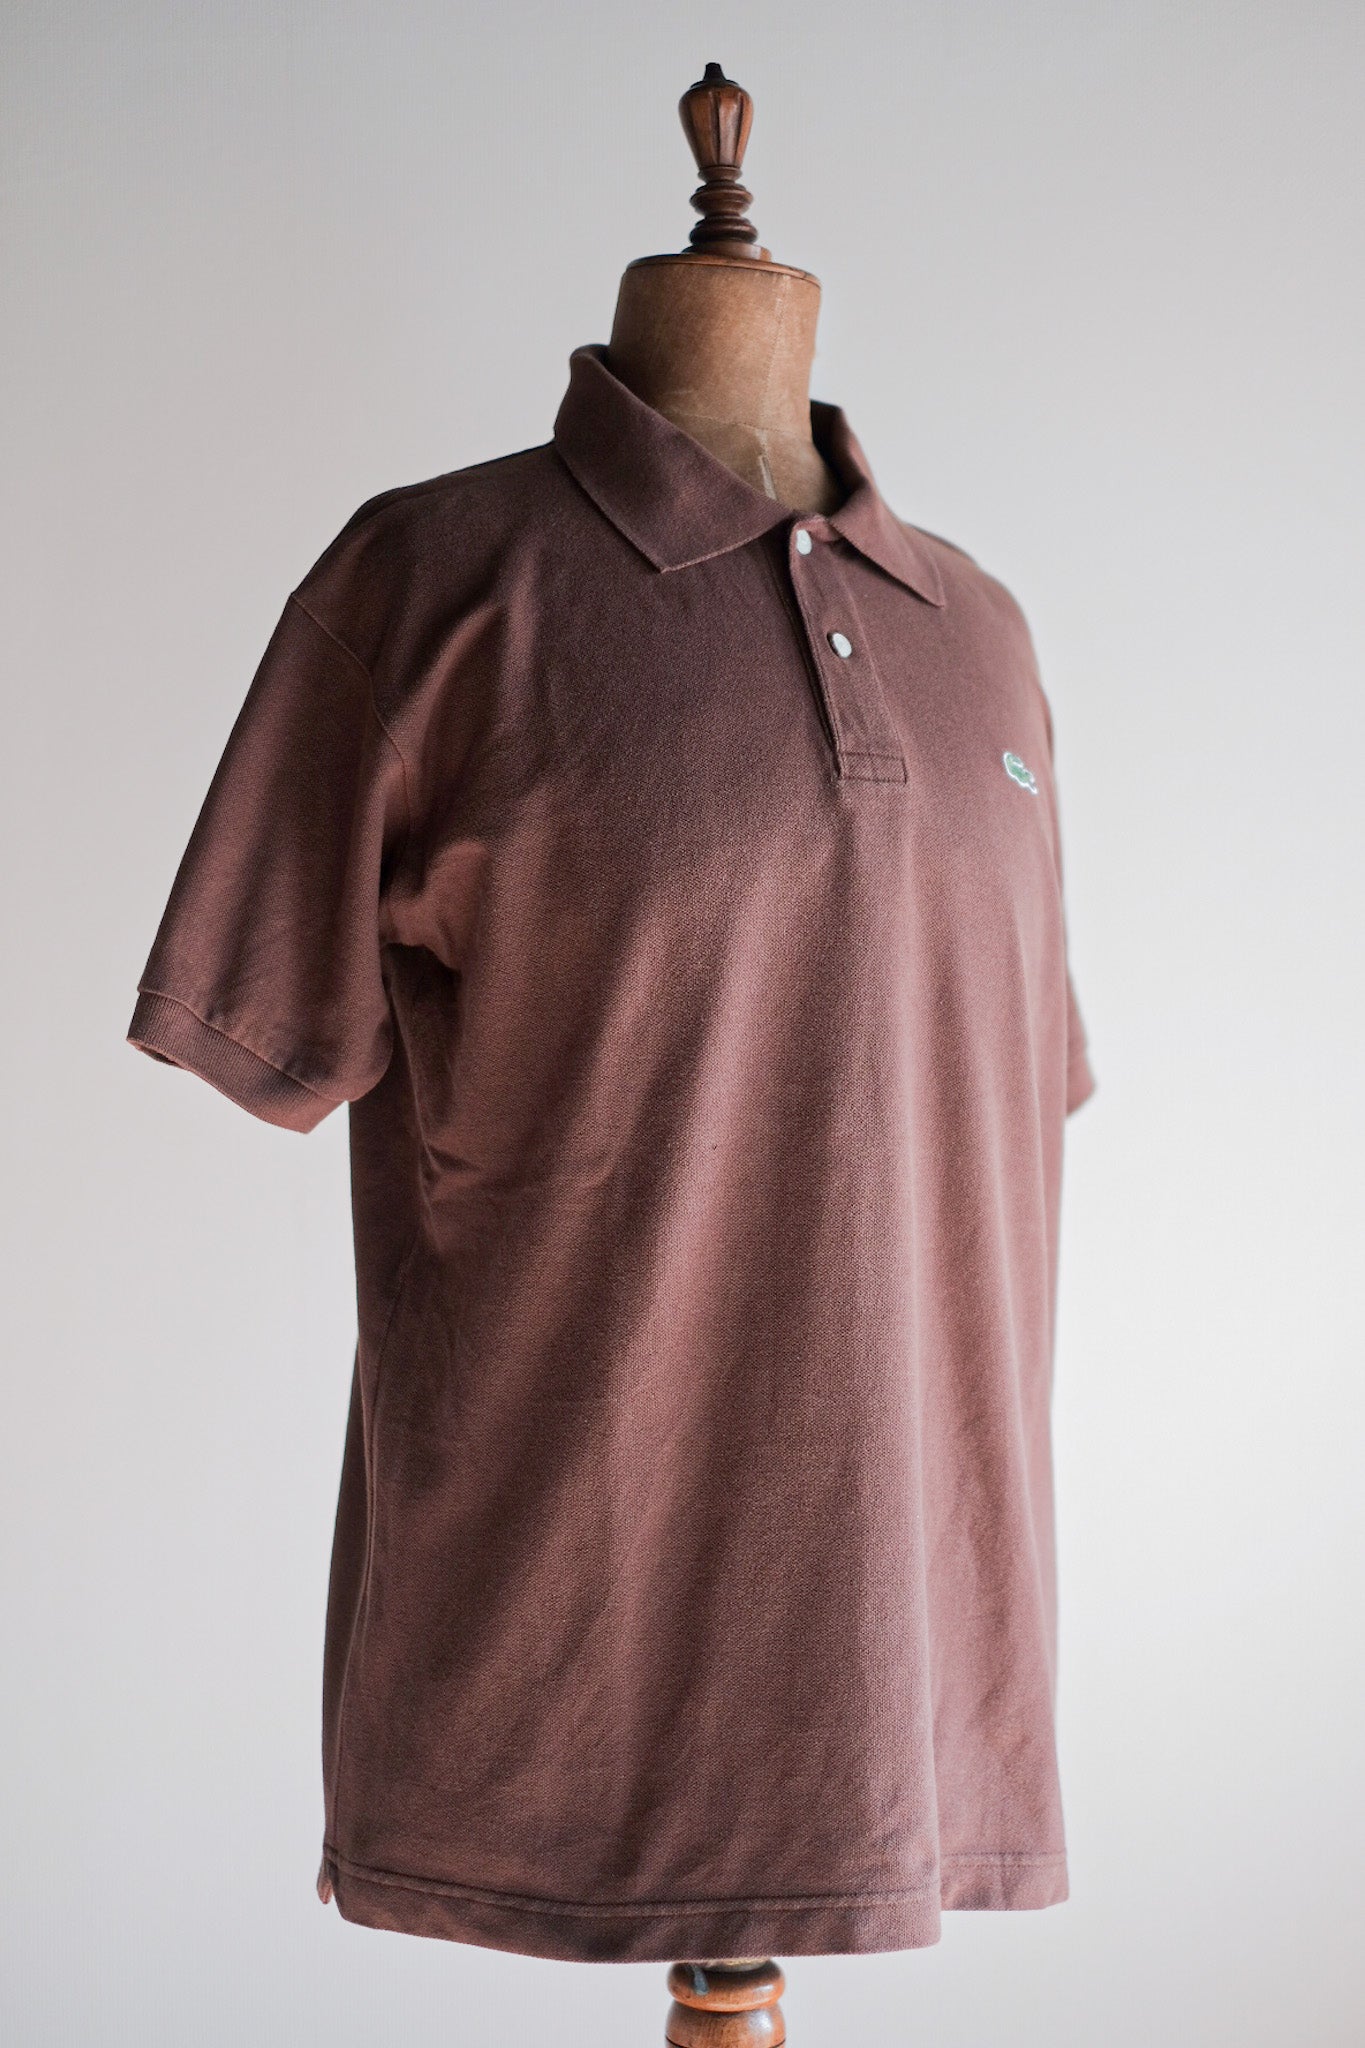 [~ 80's] Chemise Lacoste S/S Polo Size.6 "Brown"